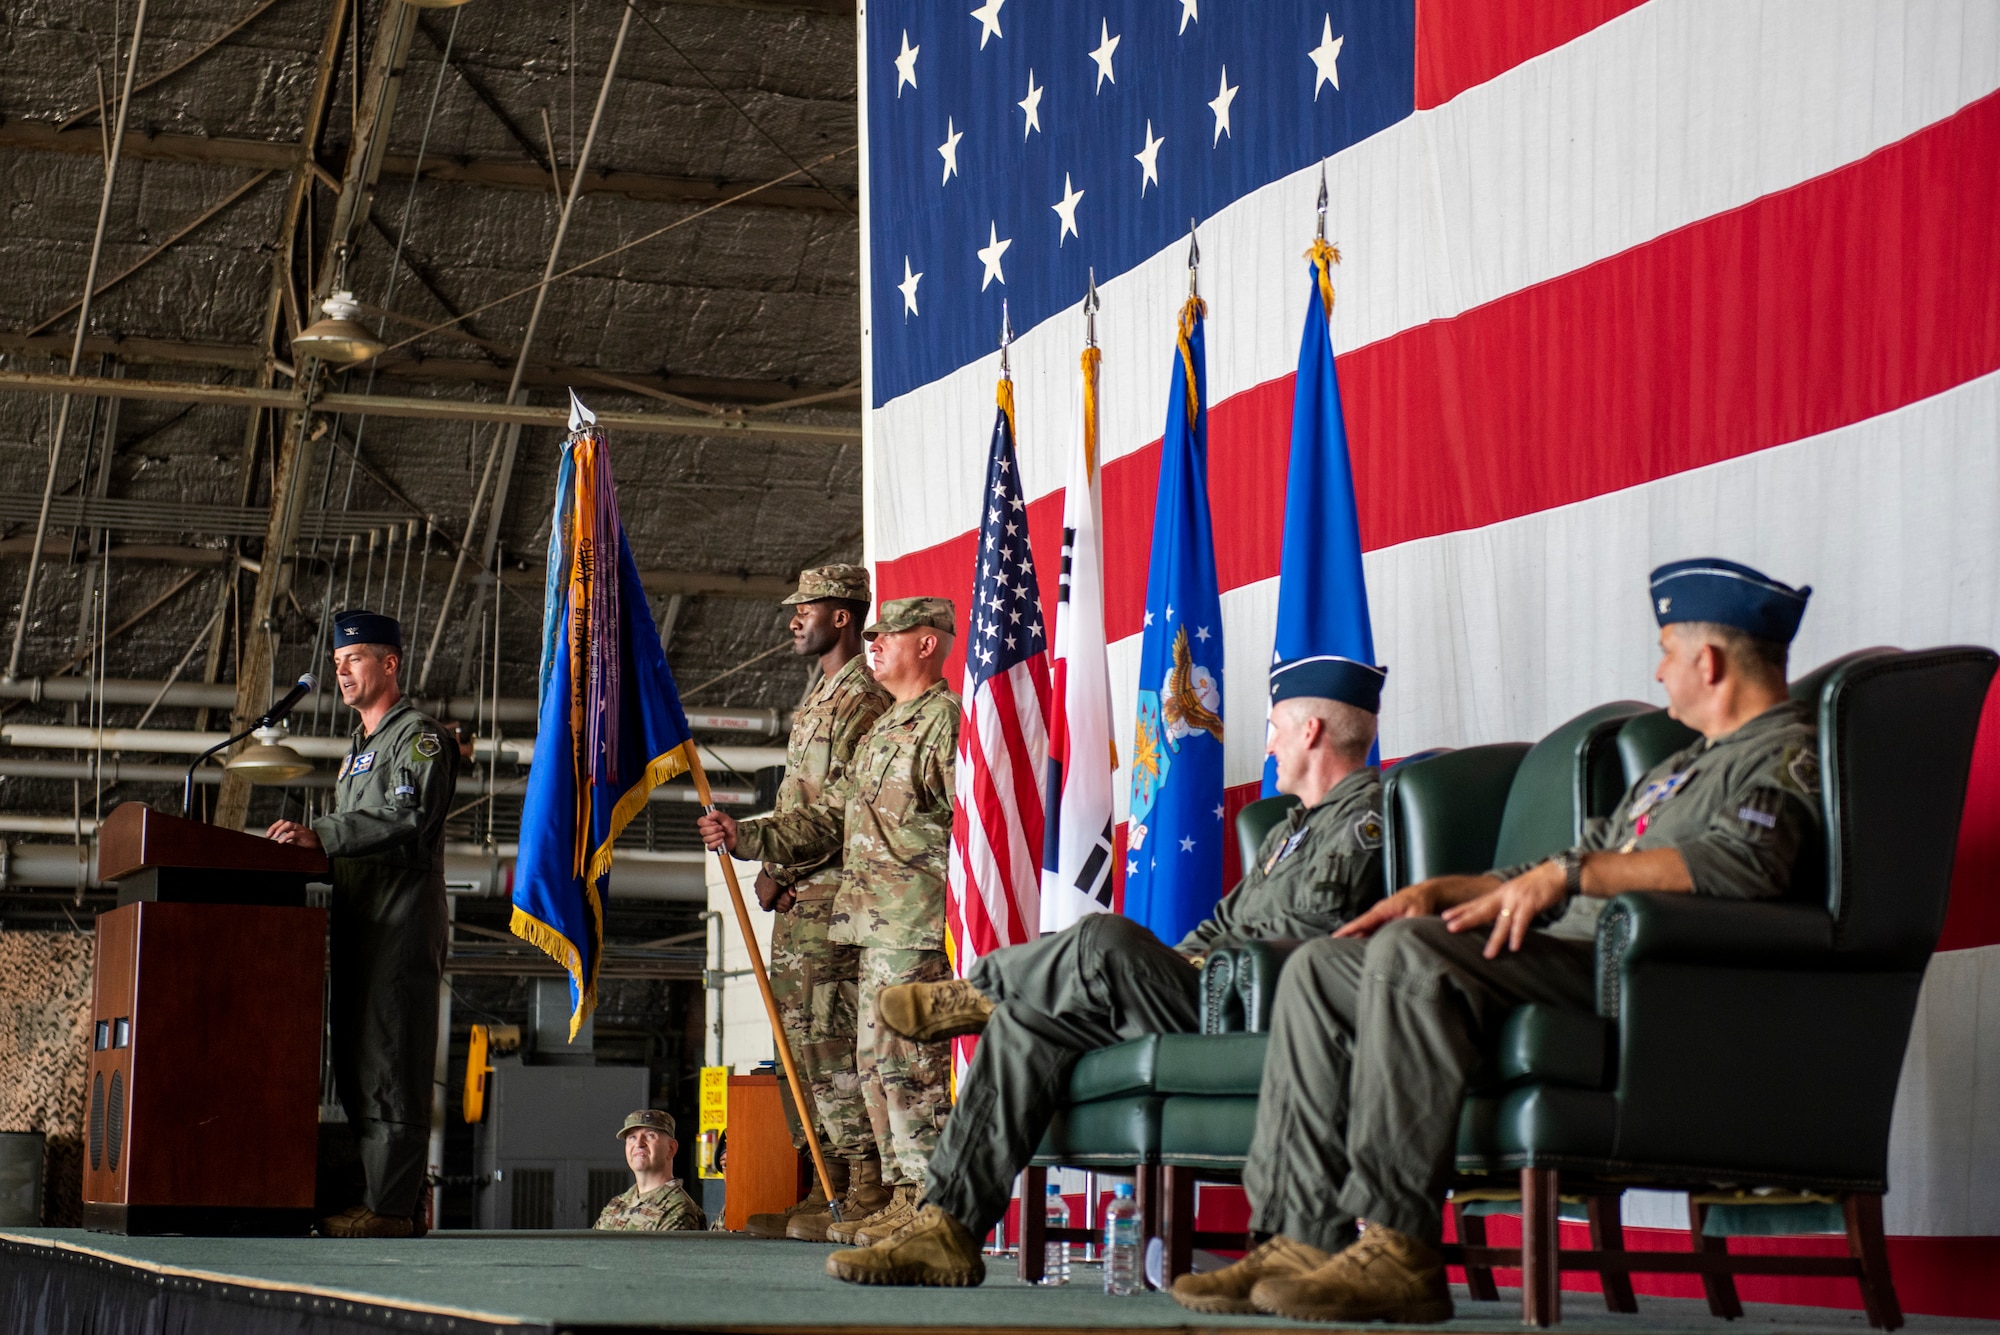 51st Fighter Wing held a change of command ceremony at Osan Air Base, Republic of Korea, June 25, 2021. Col. John Gonzales transferred command of the 51st FW to Col. Joshua Wood.